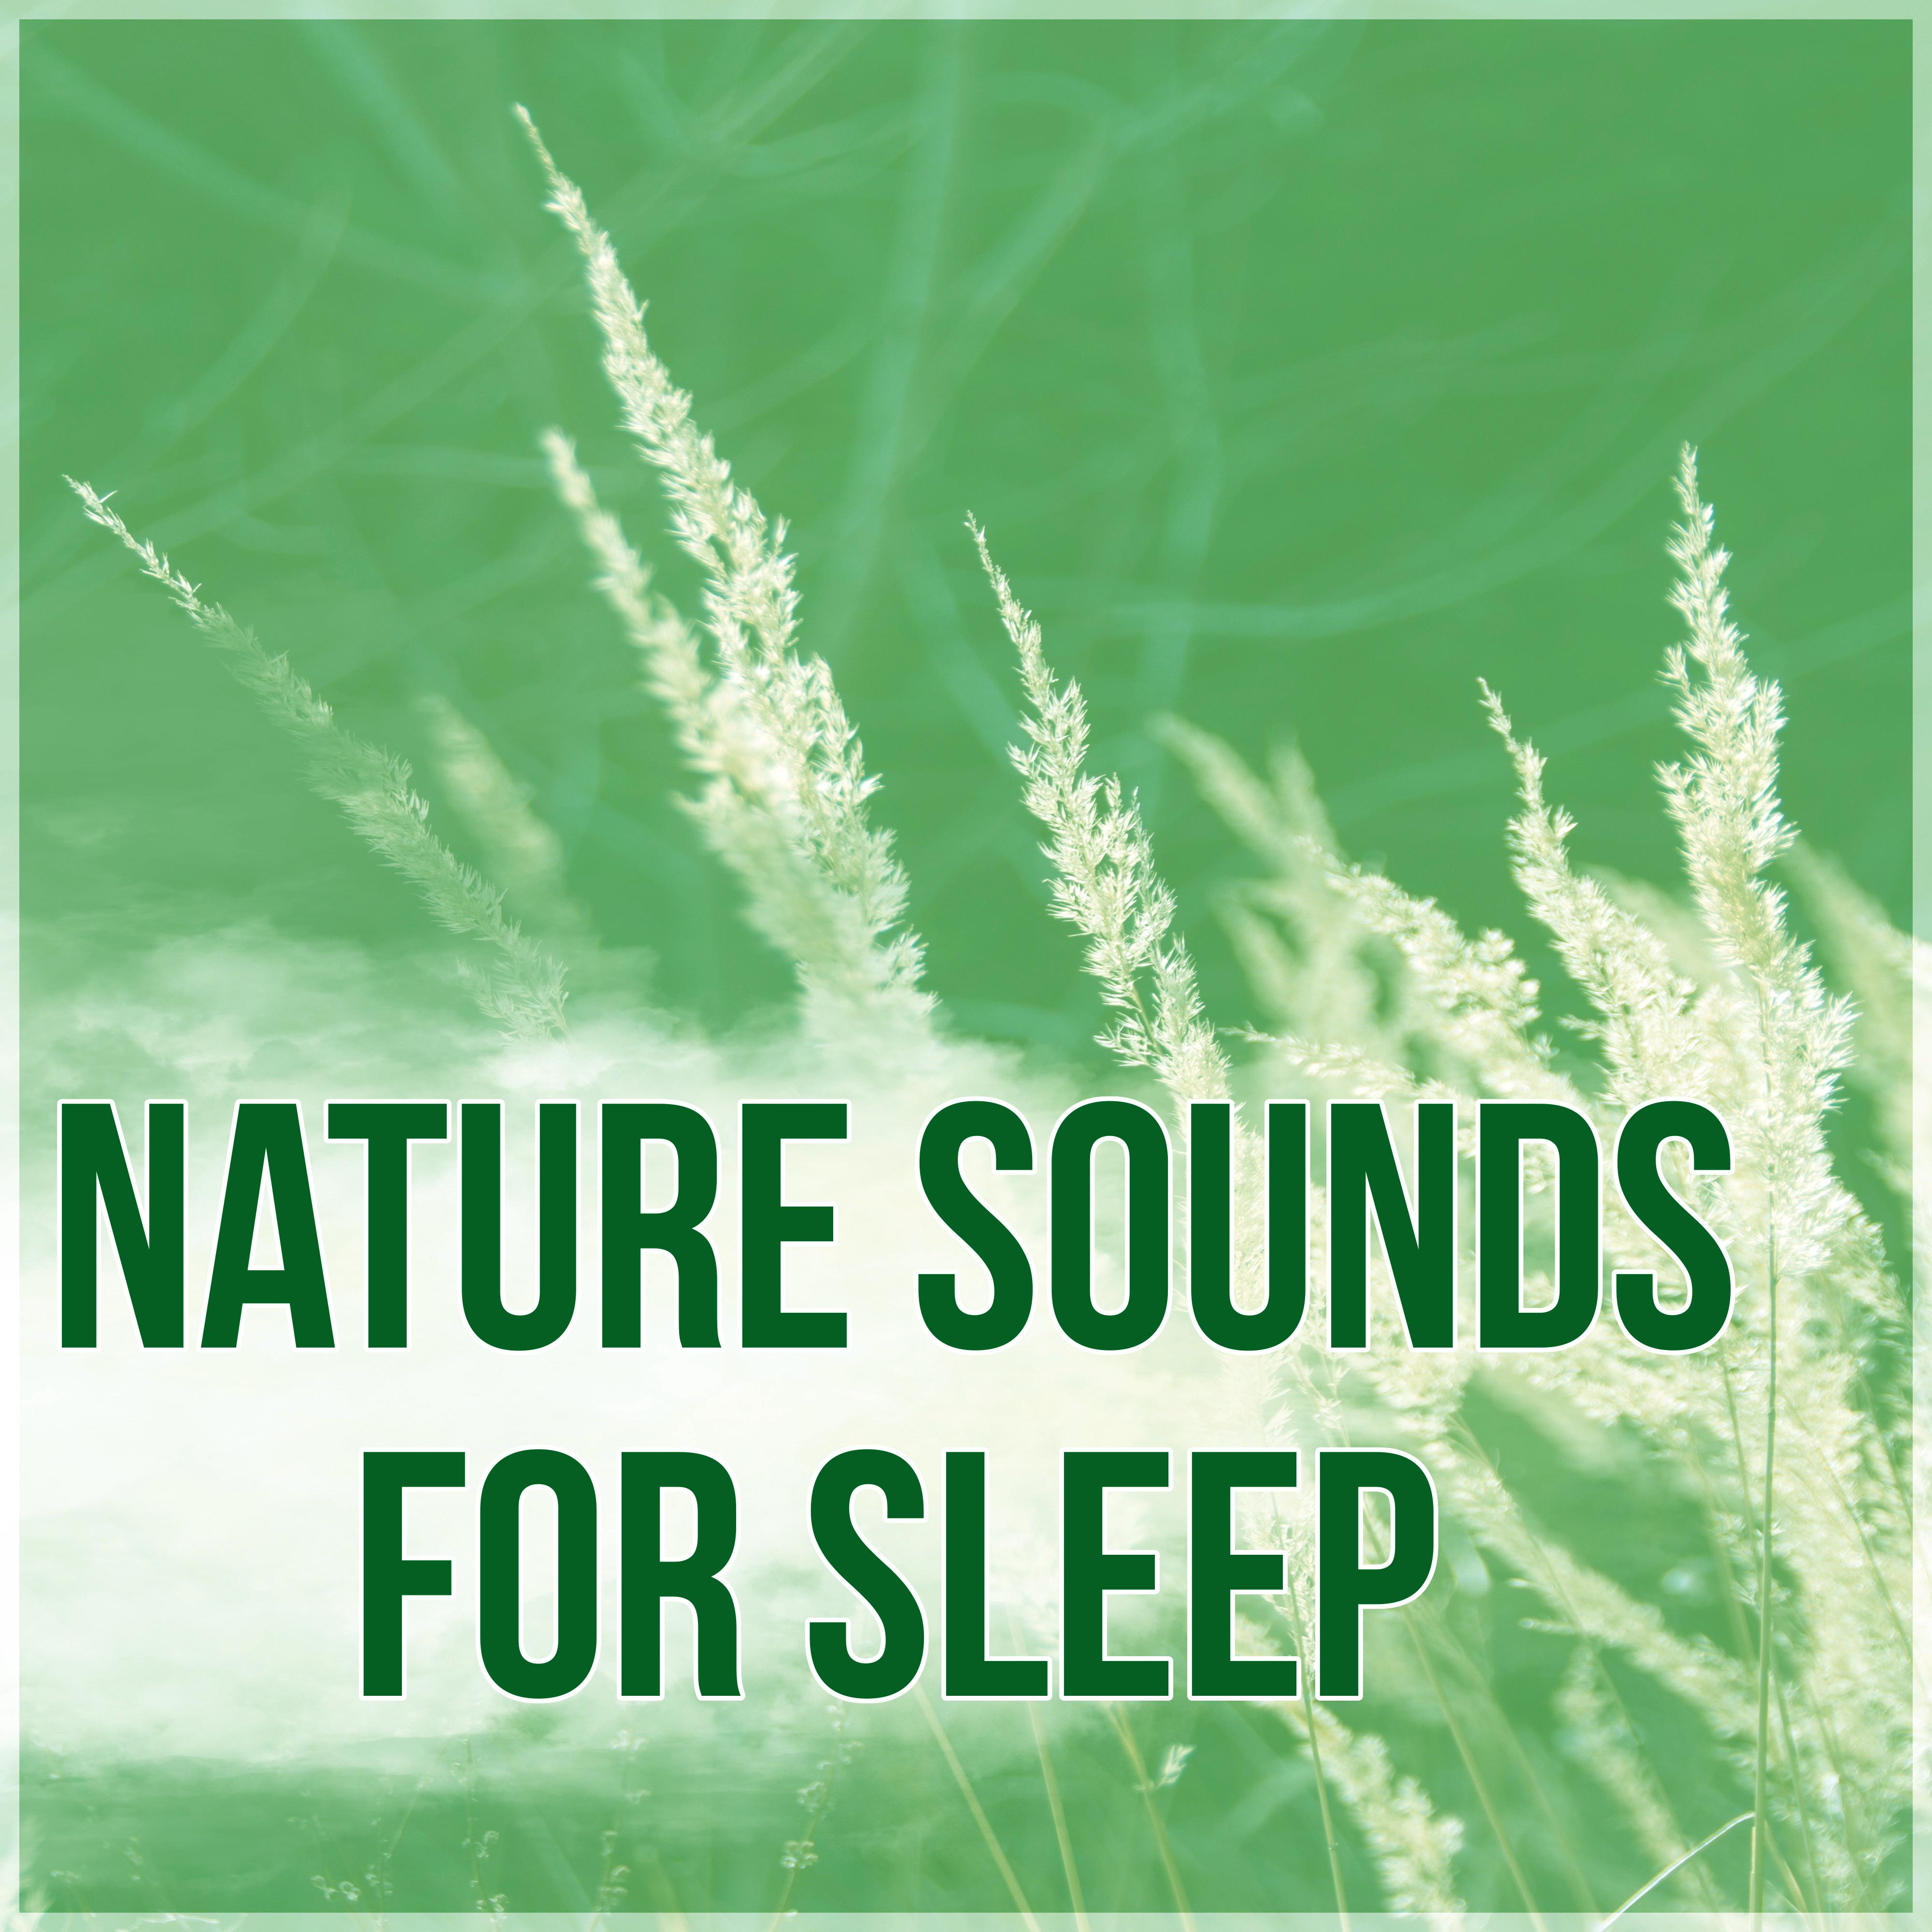 Nature Sounds for Sleep - Music and Sounds of Nature for Deep Sleep, Relaxing Sounds and Long Sleeping Songs to Help You Relax at Night, Massage Therapy & Relaxation